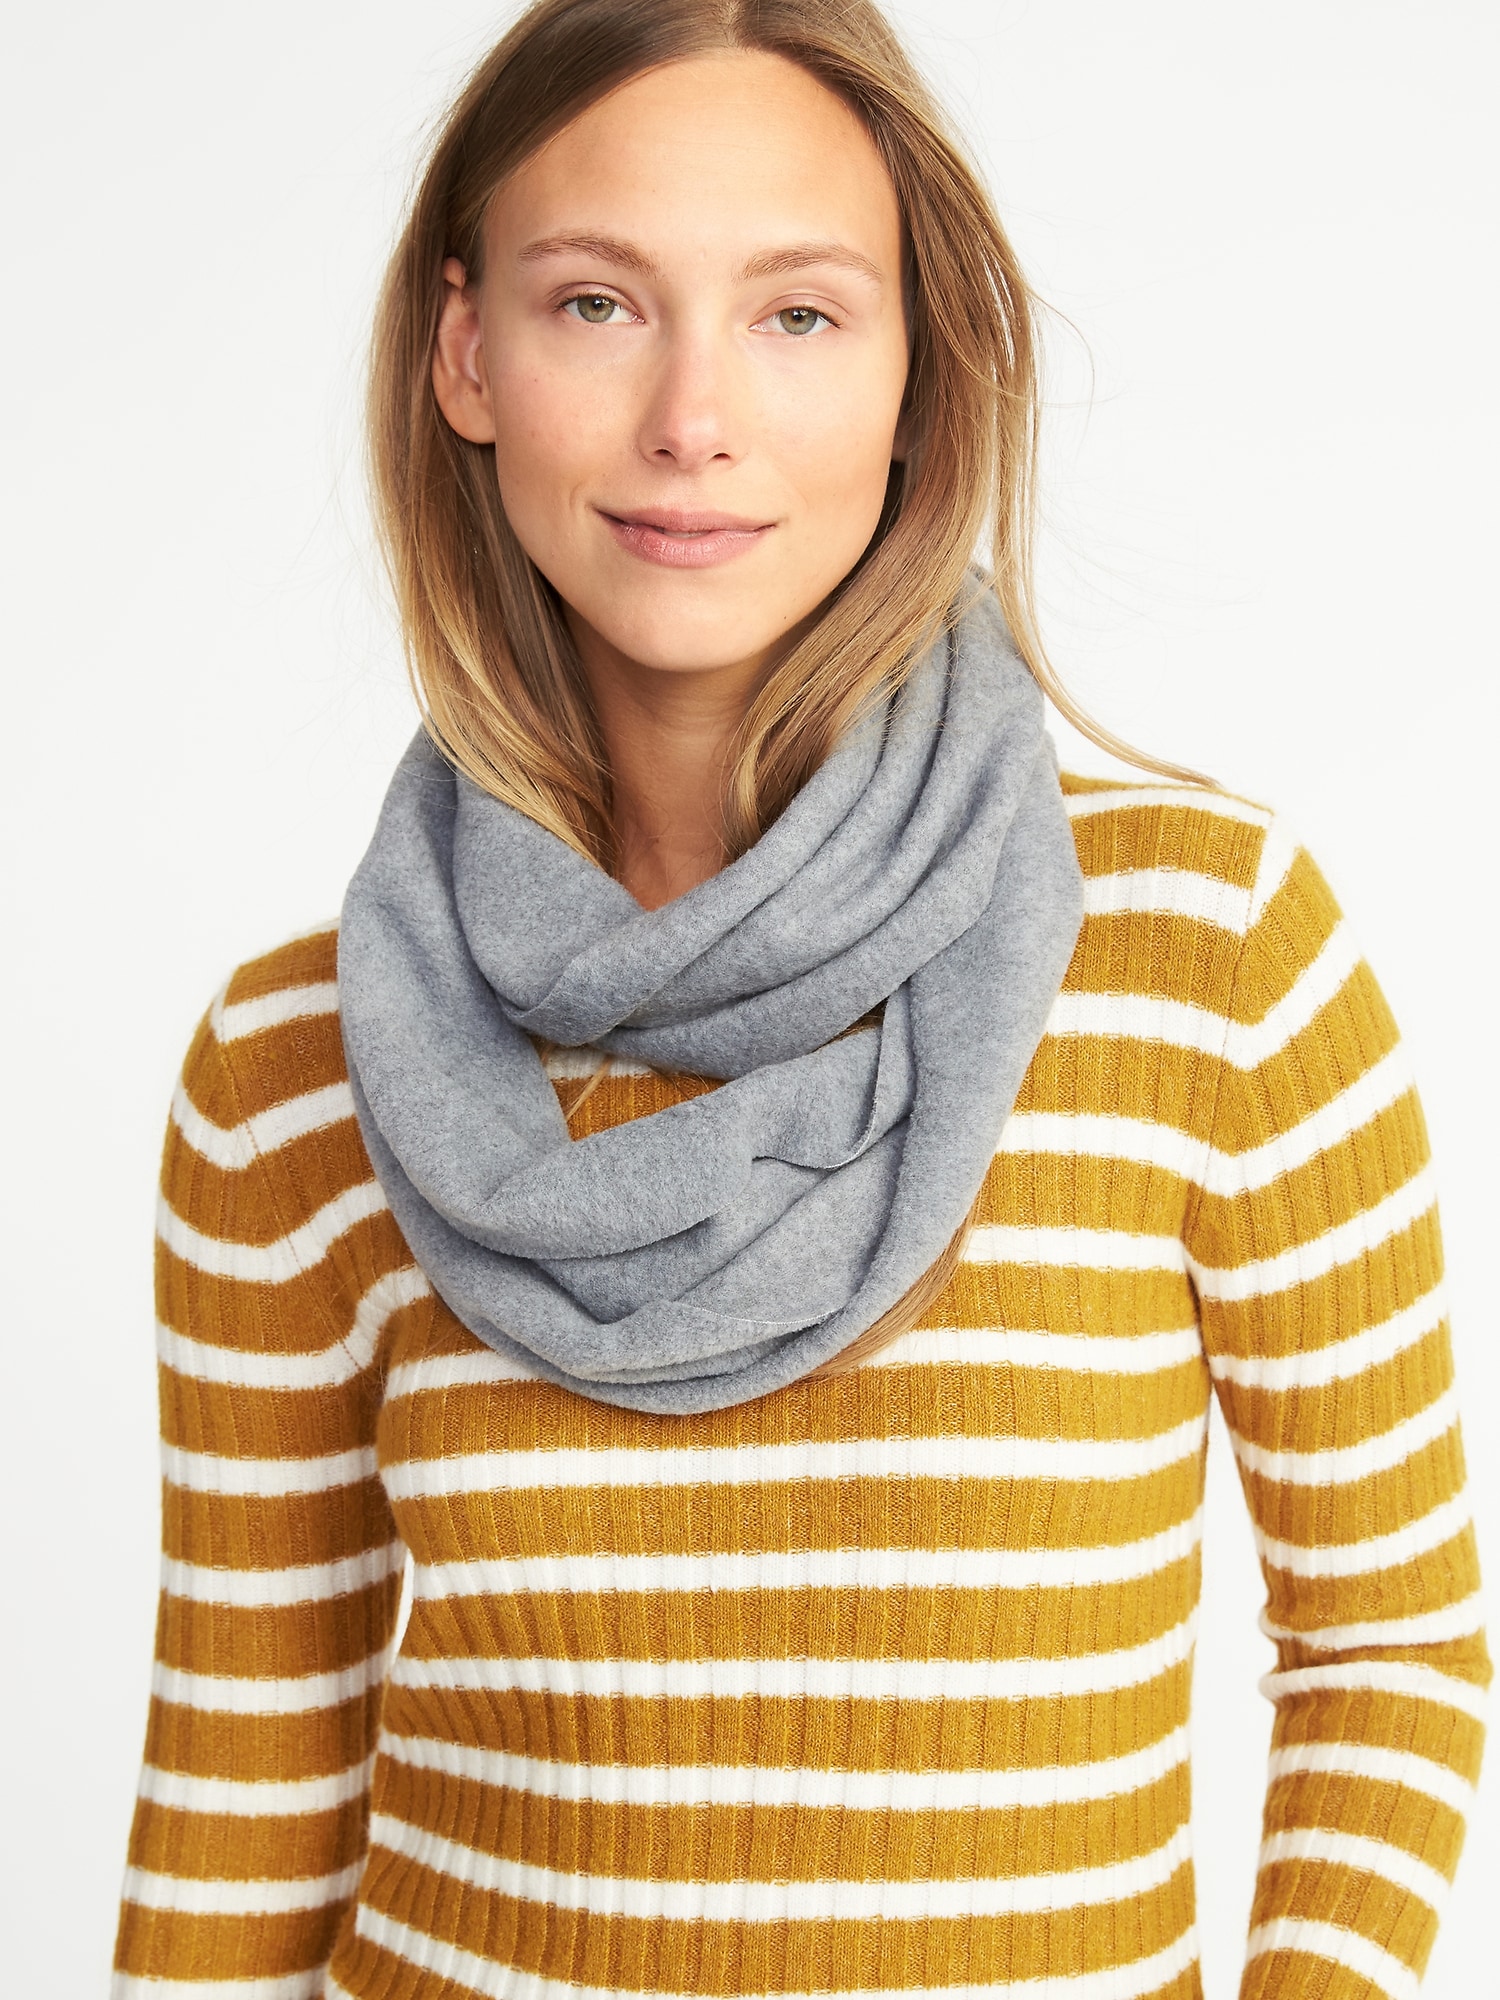 Performance Fleece Snood Scarf for Women | Old Navy